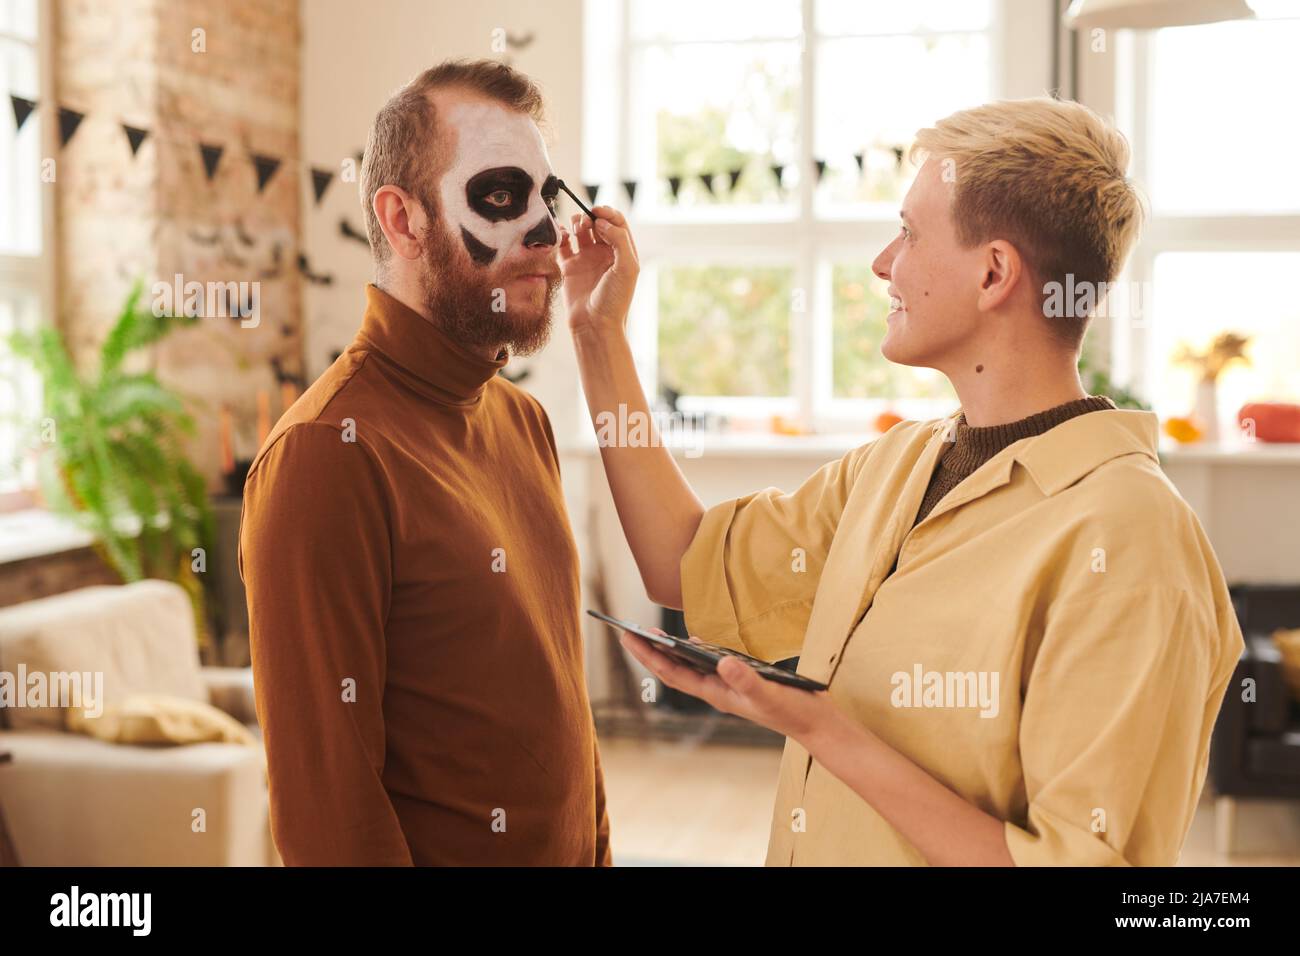 Smiling young blond-haired woman in yellow shirt applying makeup to man while preparing him for Halloween party Stock Photo